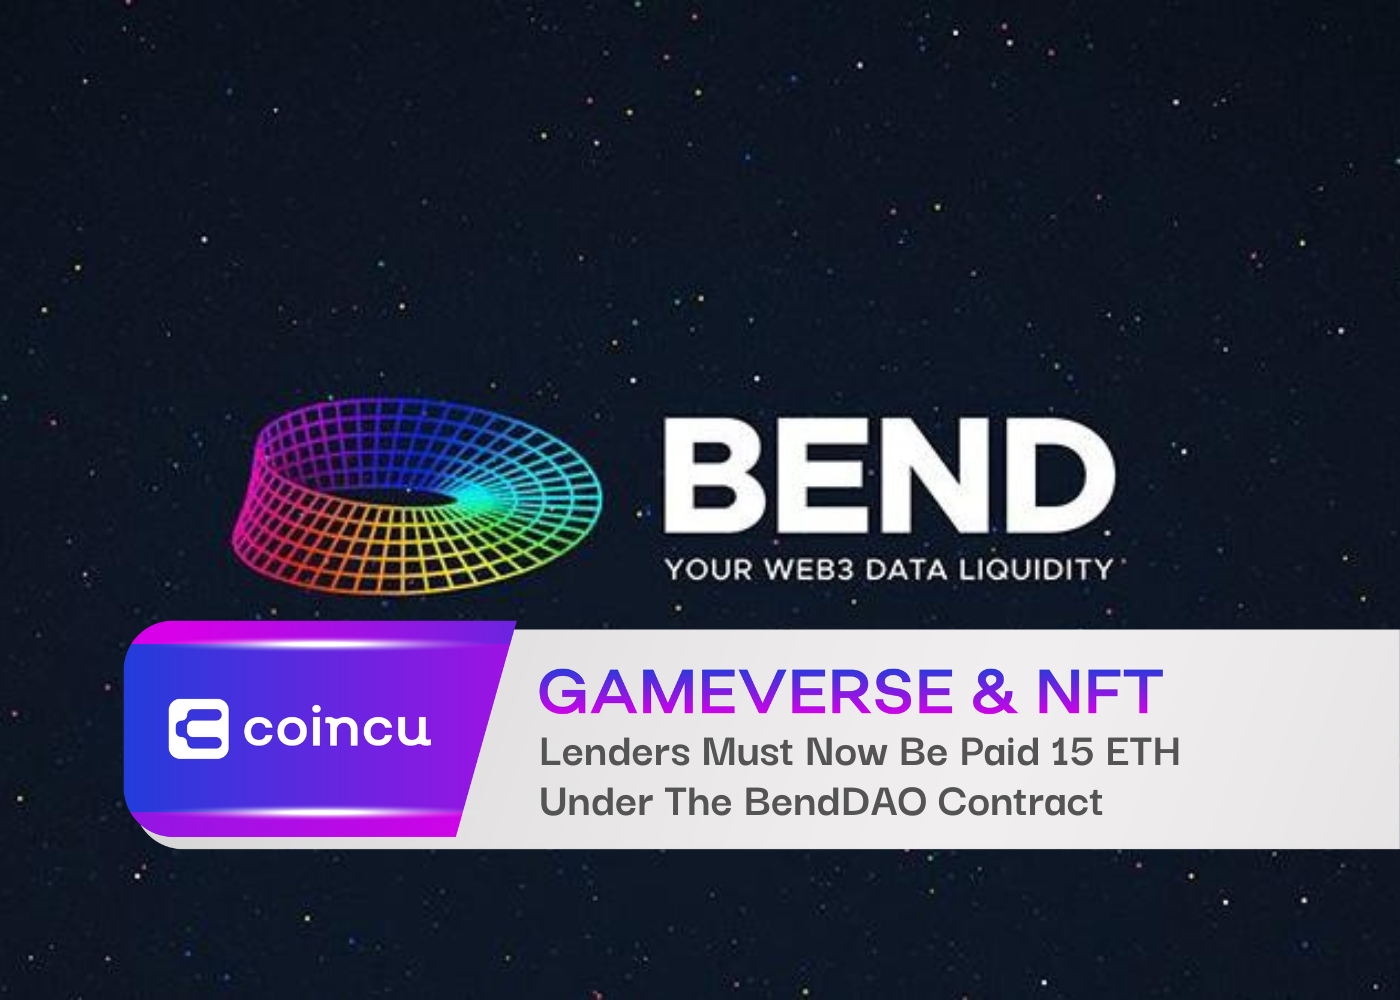 Under The BendDAO Contract